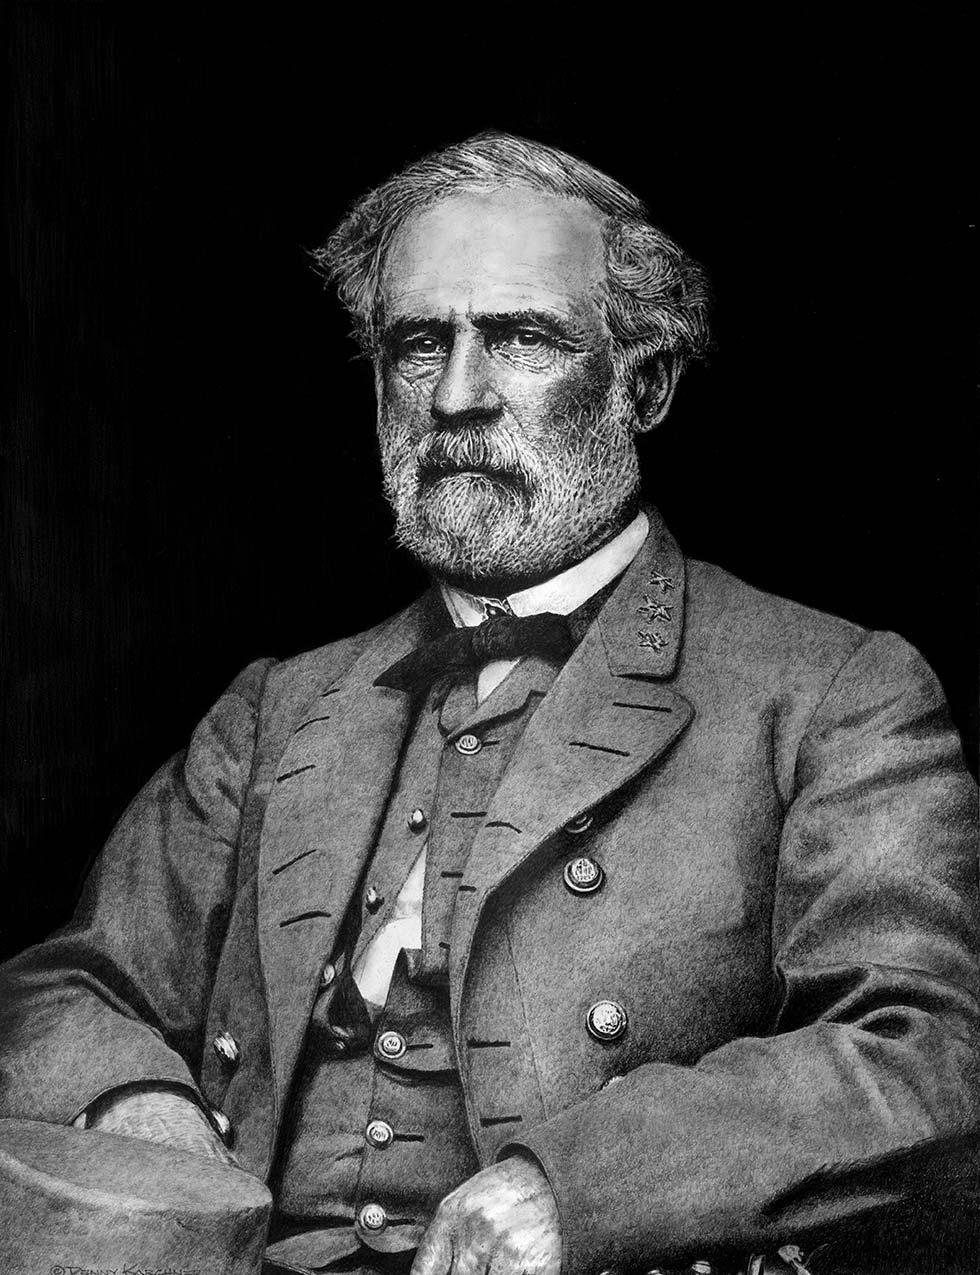 Robert E. Lee Lee gained a reputation as a brilliant tactician, and bested the Union forces in several early battles.